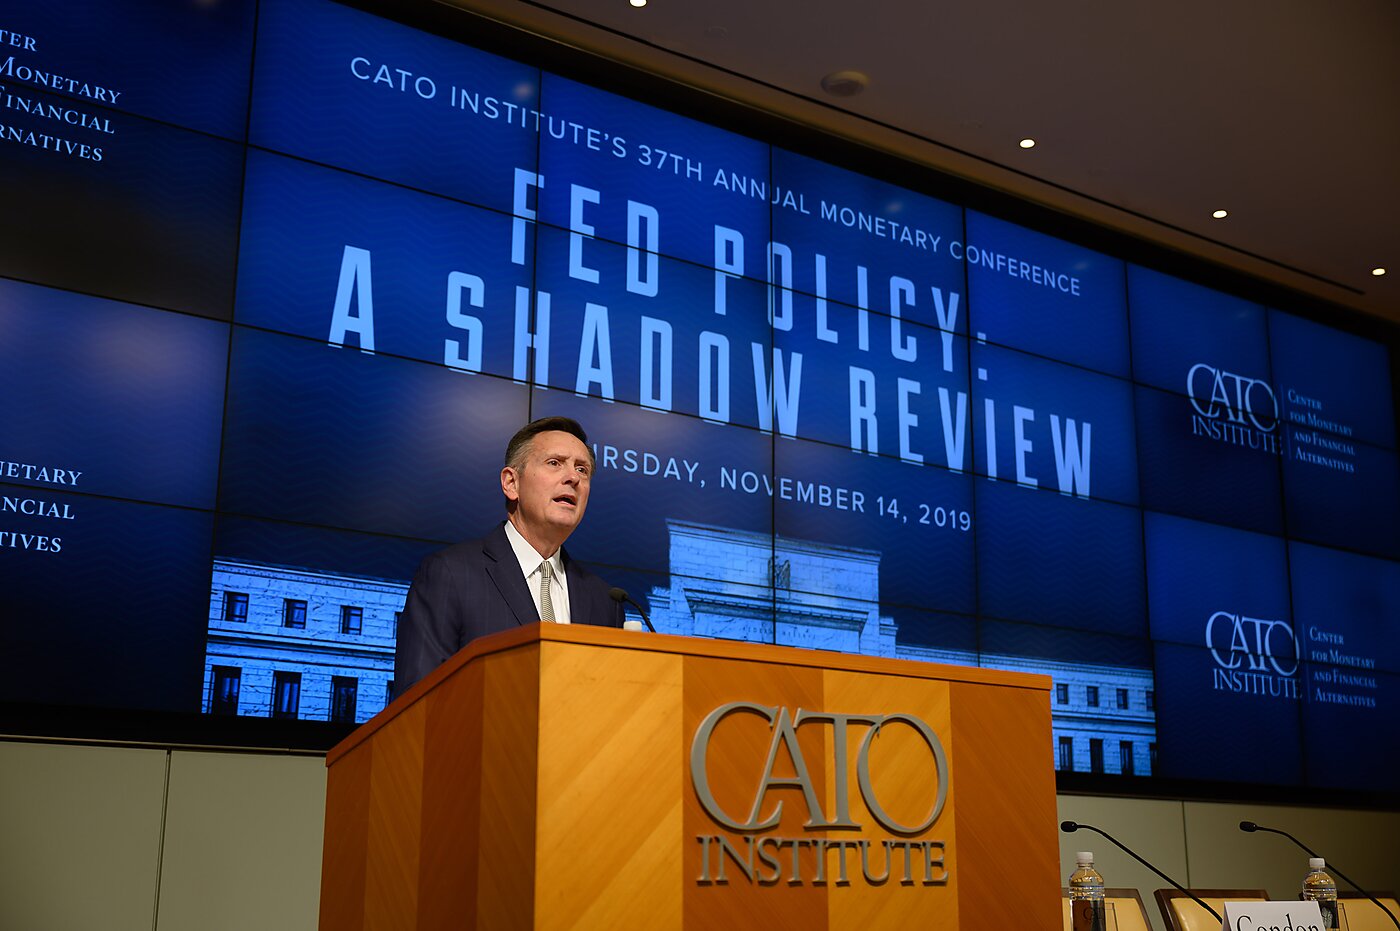 Inside Cato's 37th Annual Conference A Shadow Review of Fed